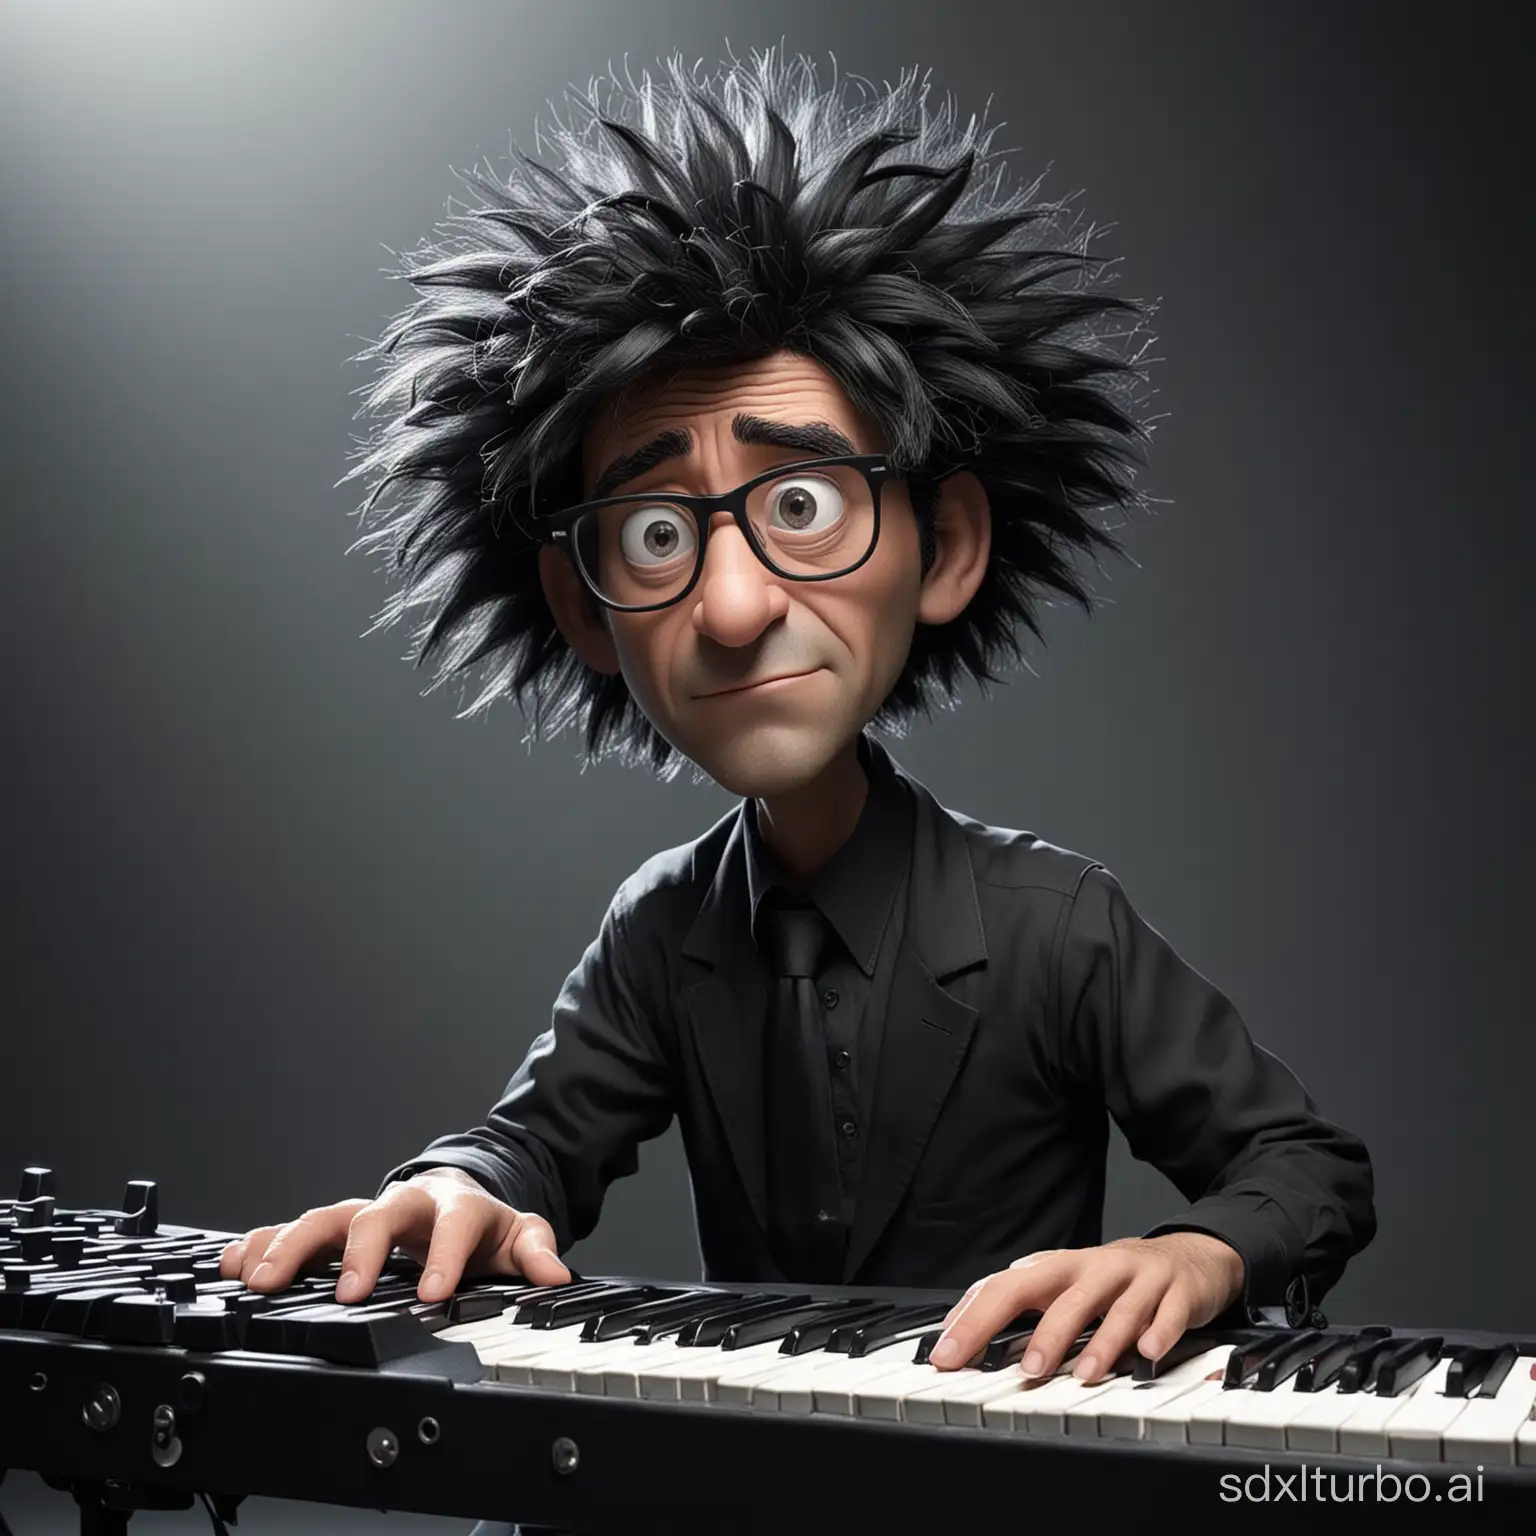 A French musician, playing keyboard, black spike , dressed in black, age 57, photo look like Pixar cartoon stylehair